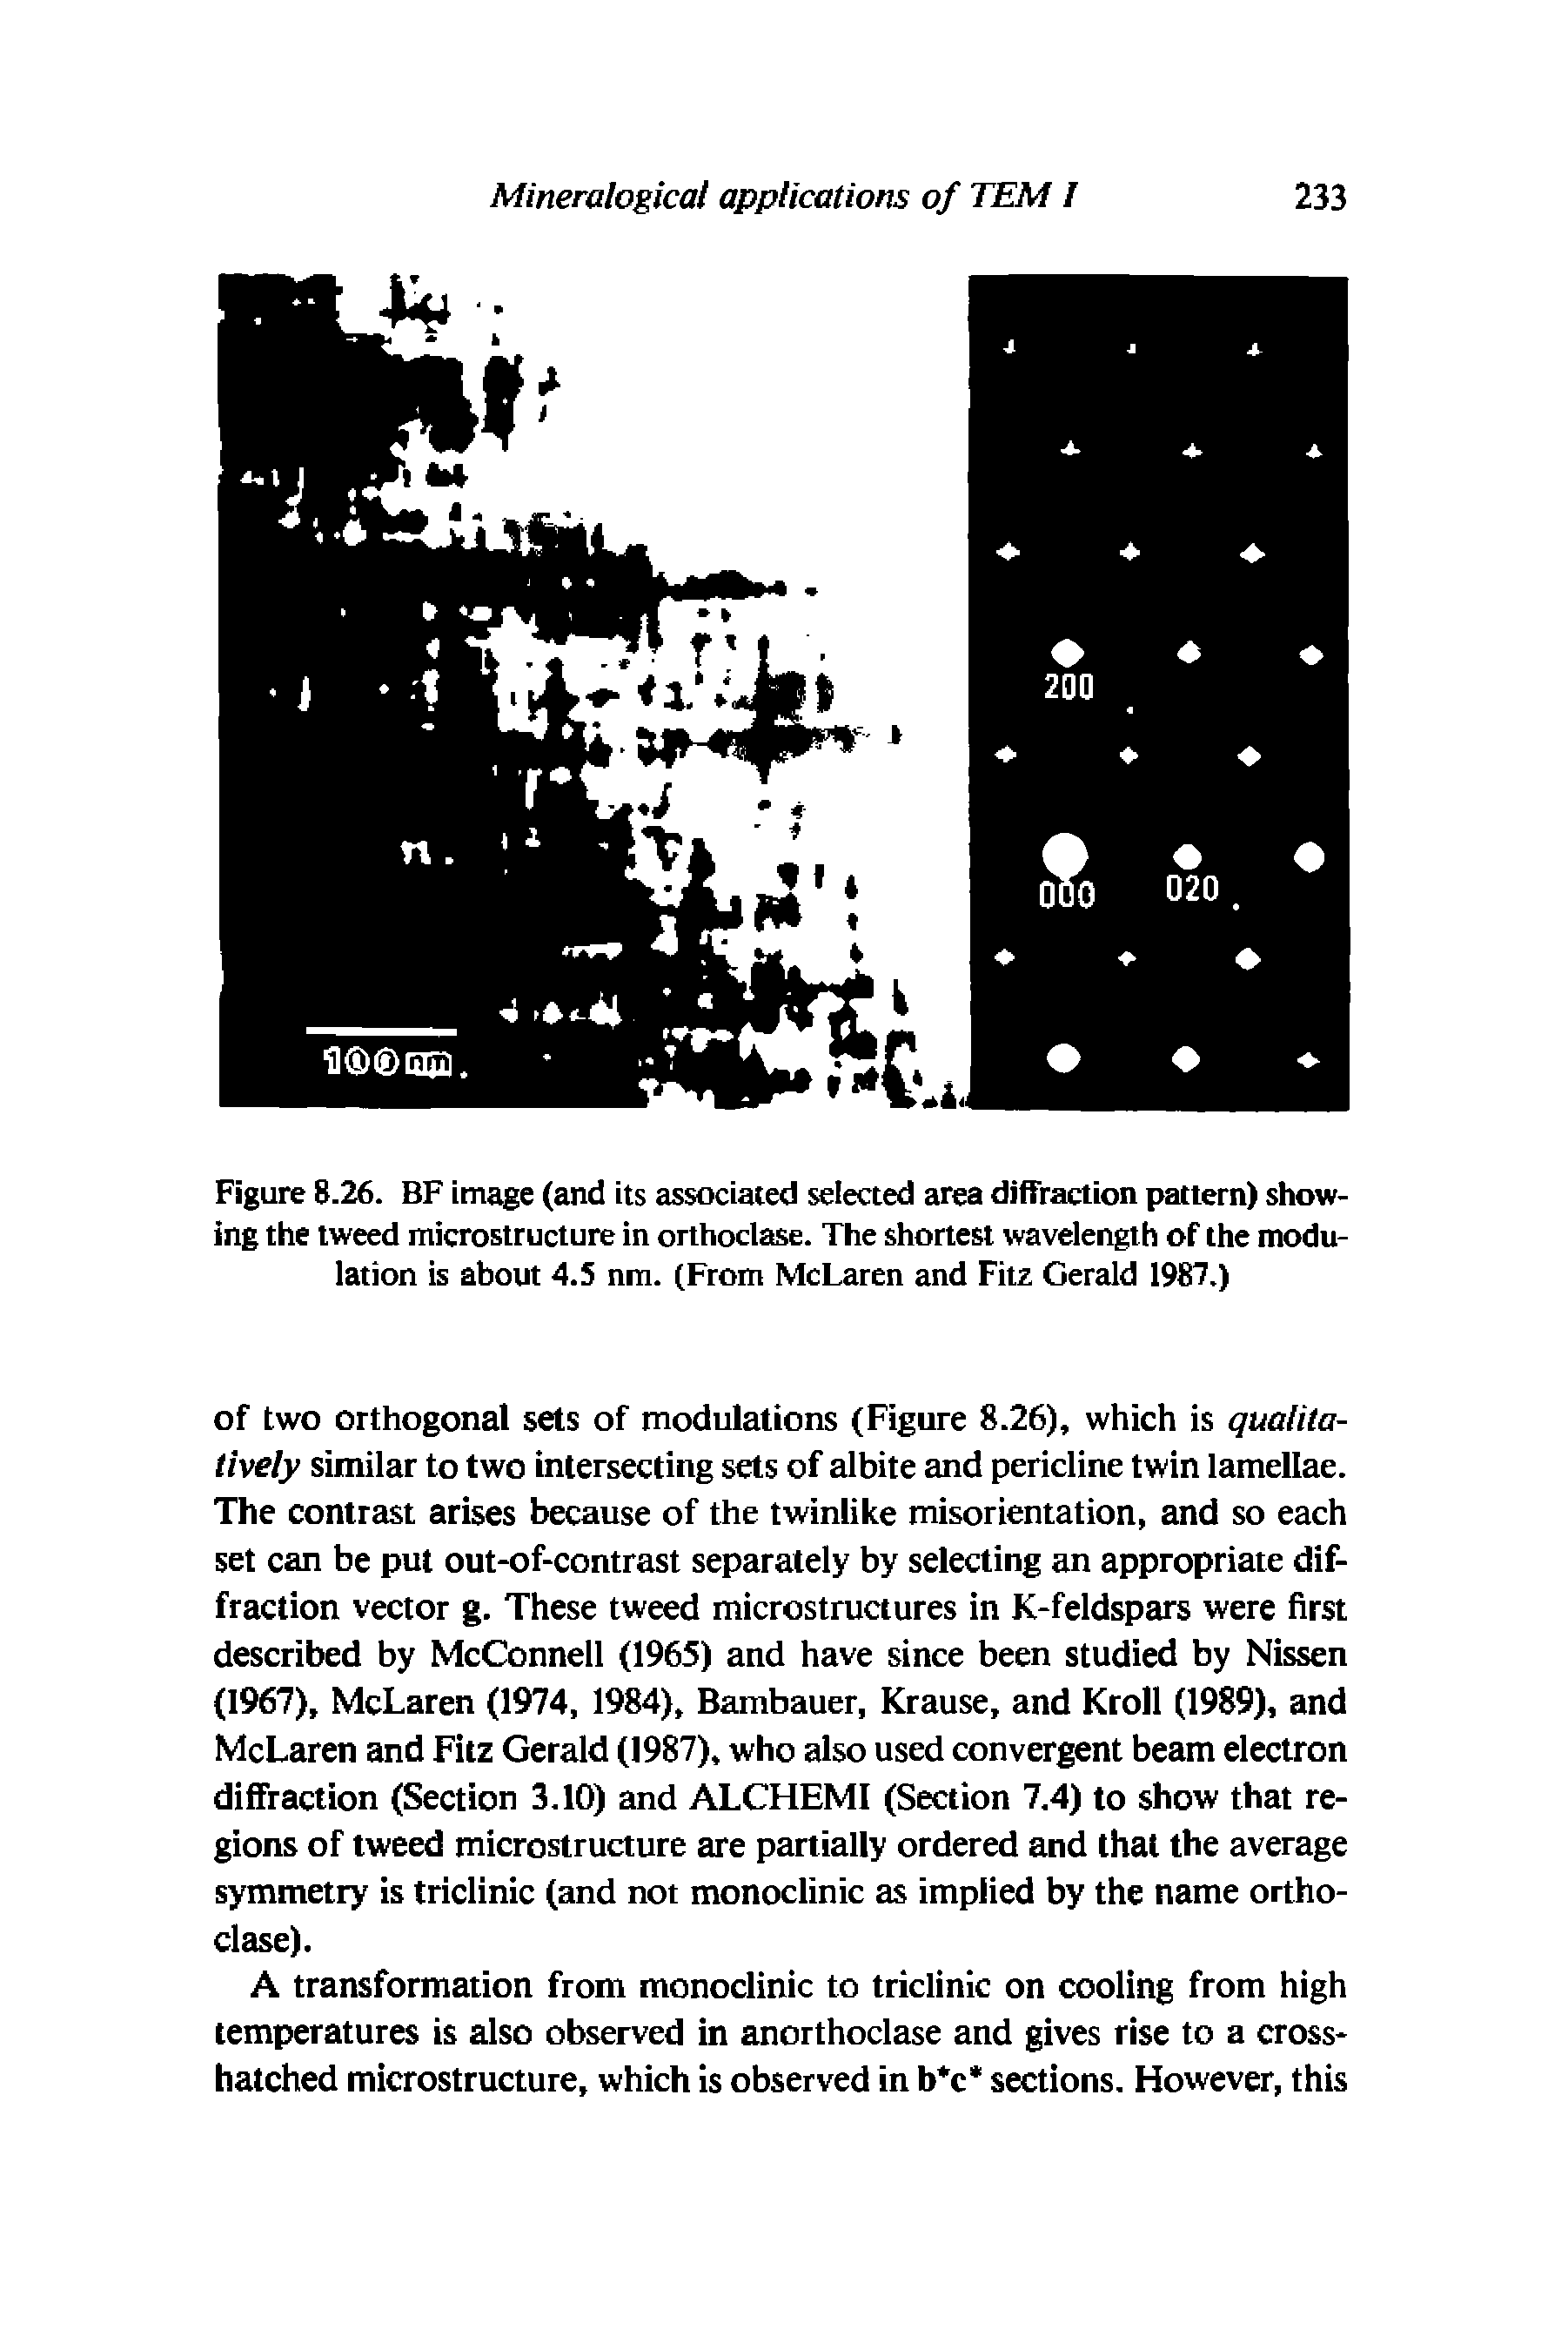 Figure 8.26. BF image (and its associated selected area diffraaion pattern) showing the tweed microstructure in orthoclase. The shortest wavelength of the modulation is about 4.5 nm. (From McLaren and Fitz Gerald 1987.)...